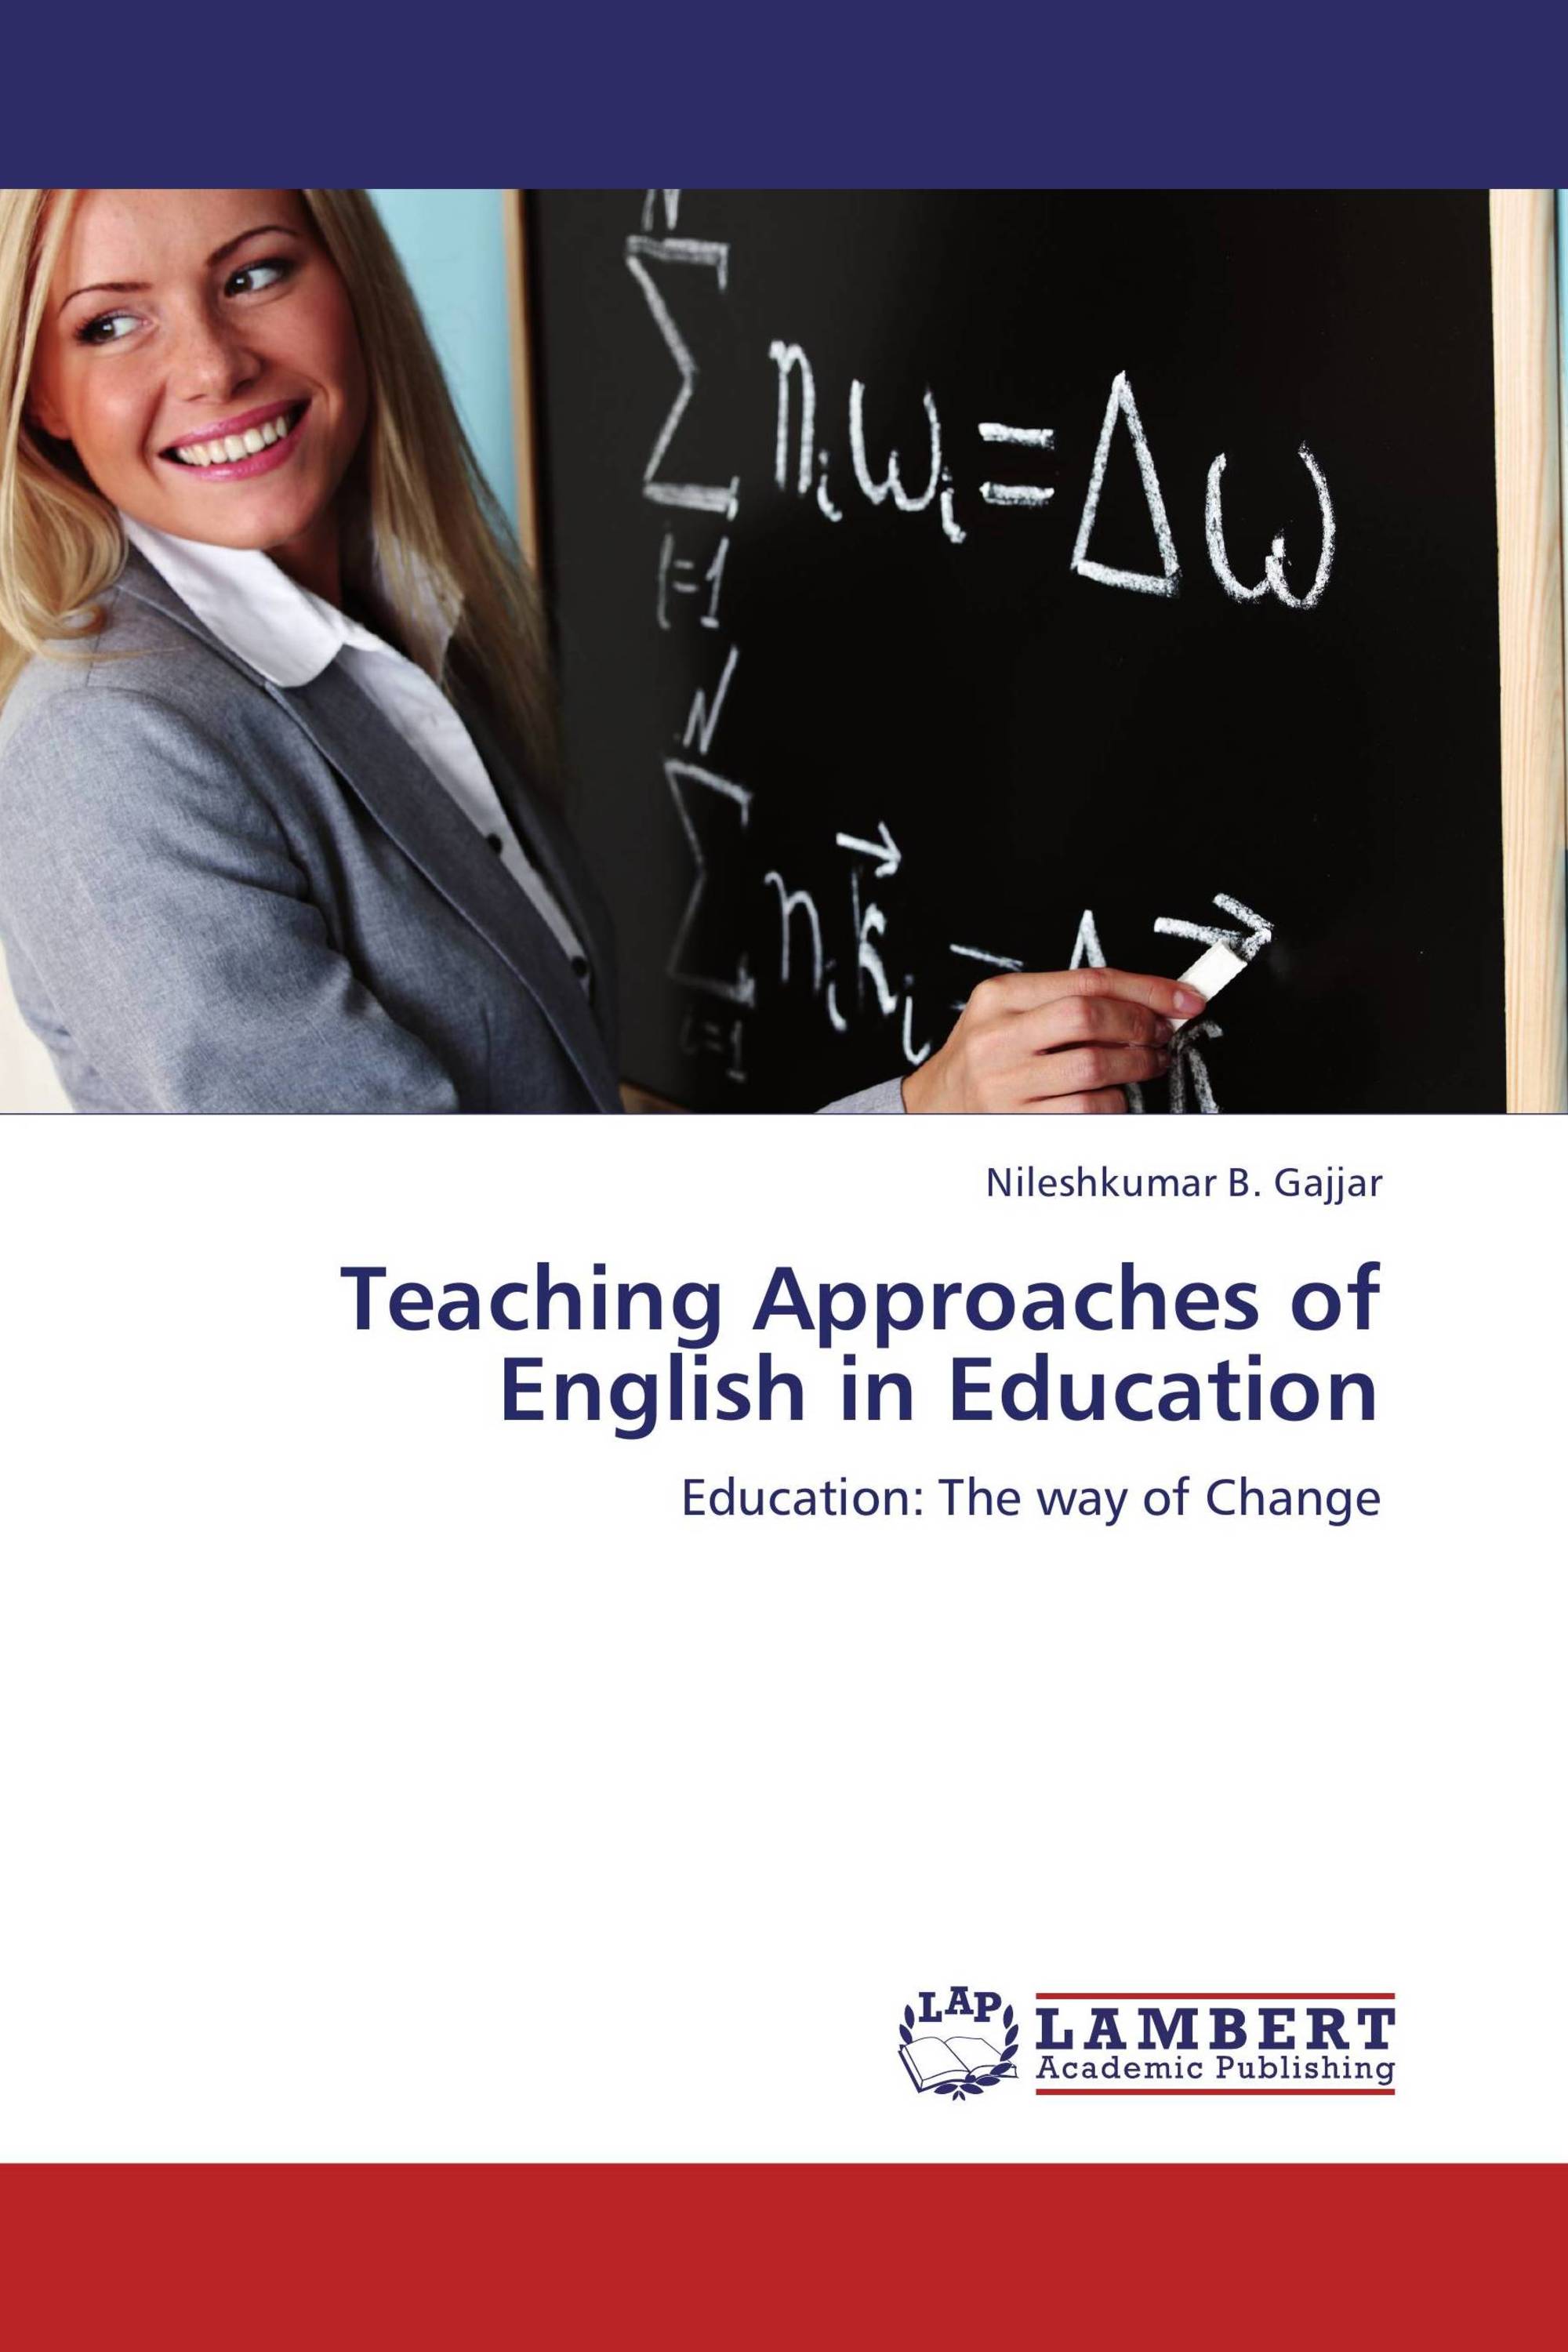 thesis on teaching approaches